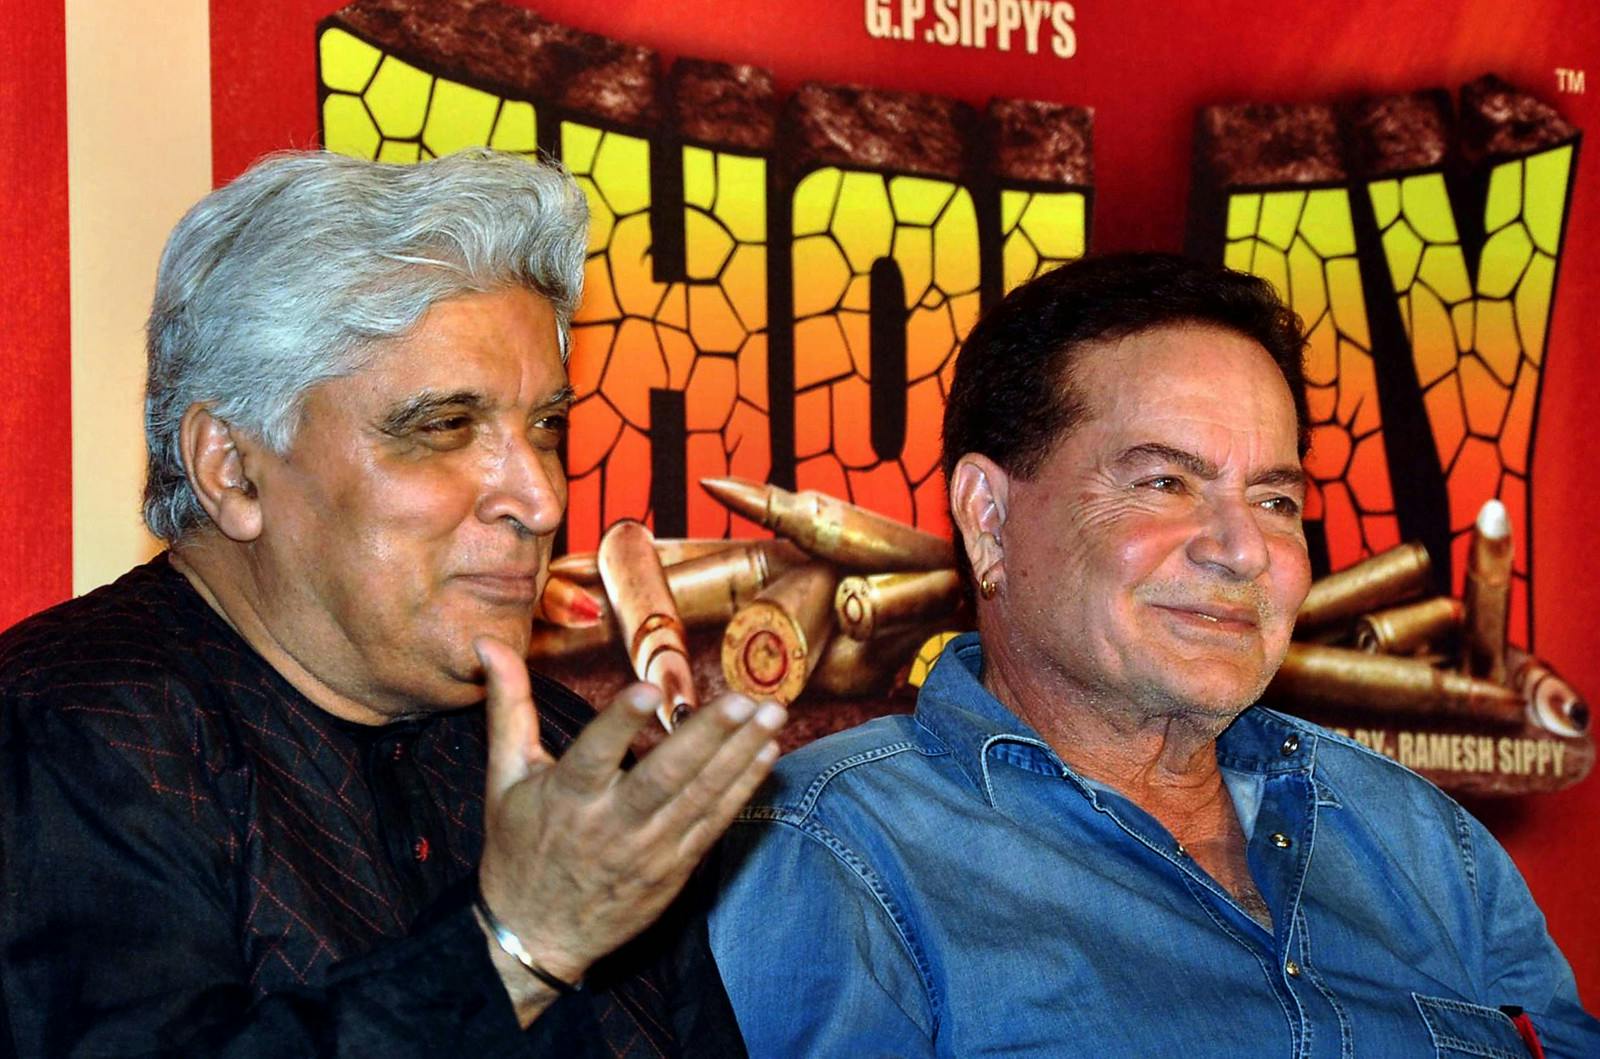 Indian Bollywood scriptwriters Javed Akhtar (L) and Salim Khan (R) speak to media at a promotional event for the film Sholay, re-released in 3D, on November 7, 2013 (STRDEL/AFP via Getty Images)